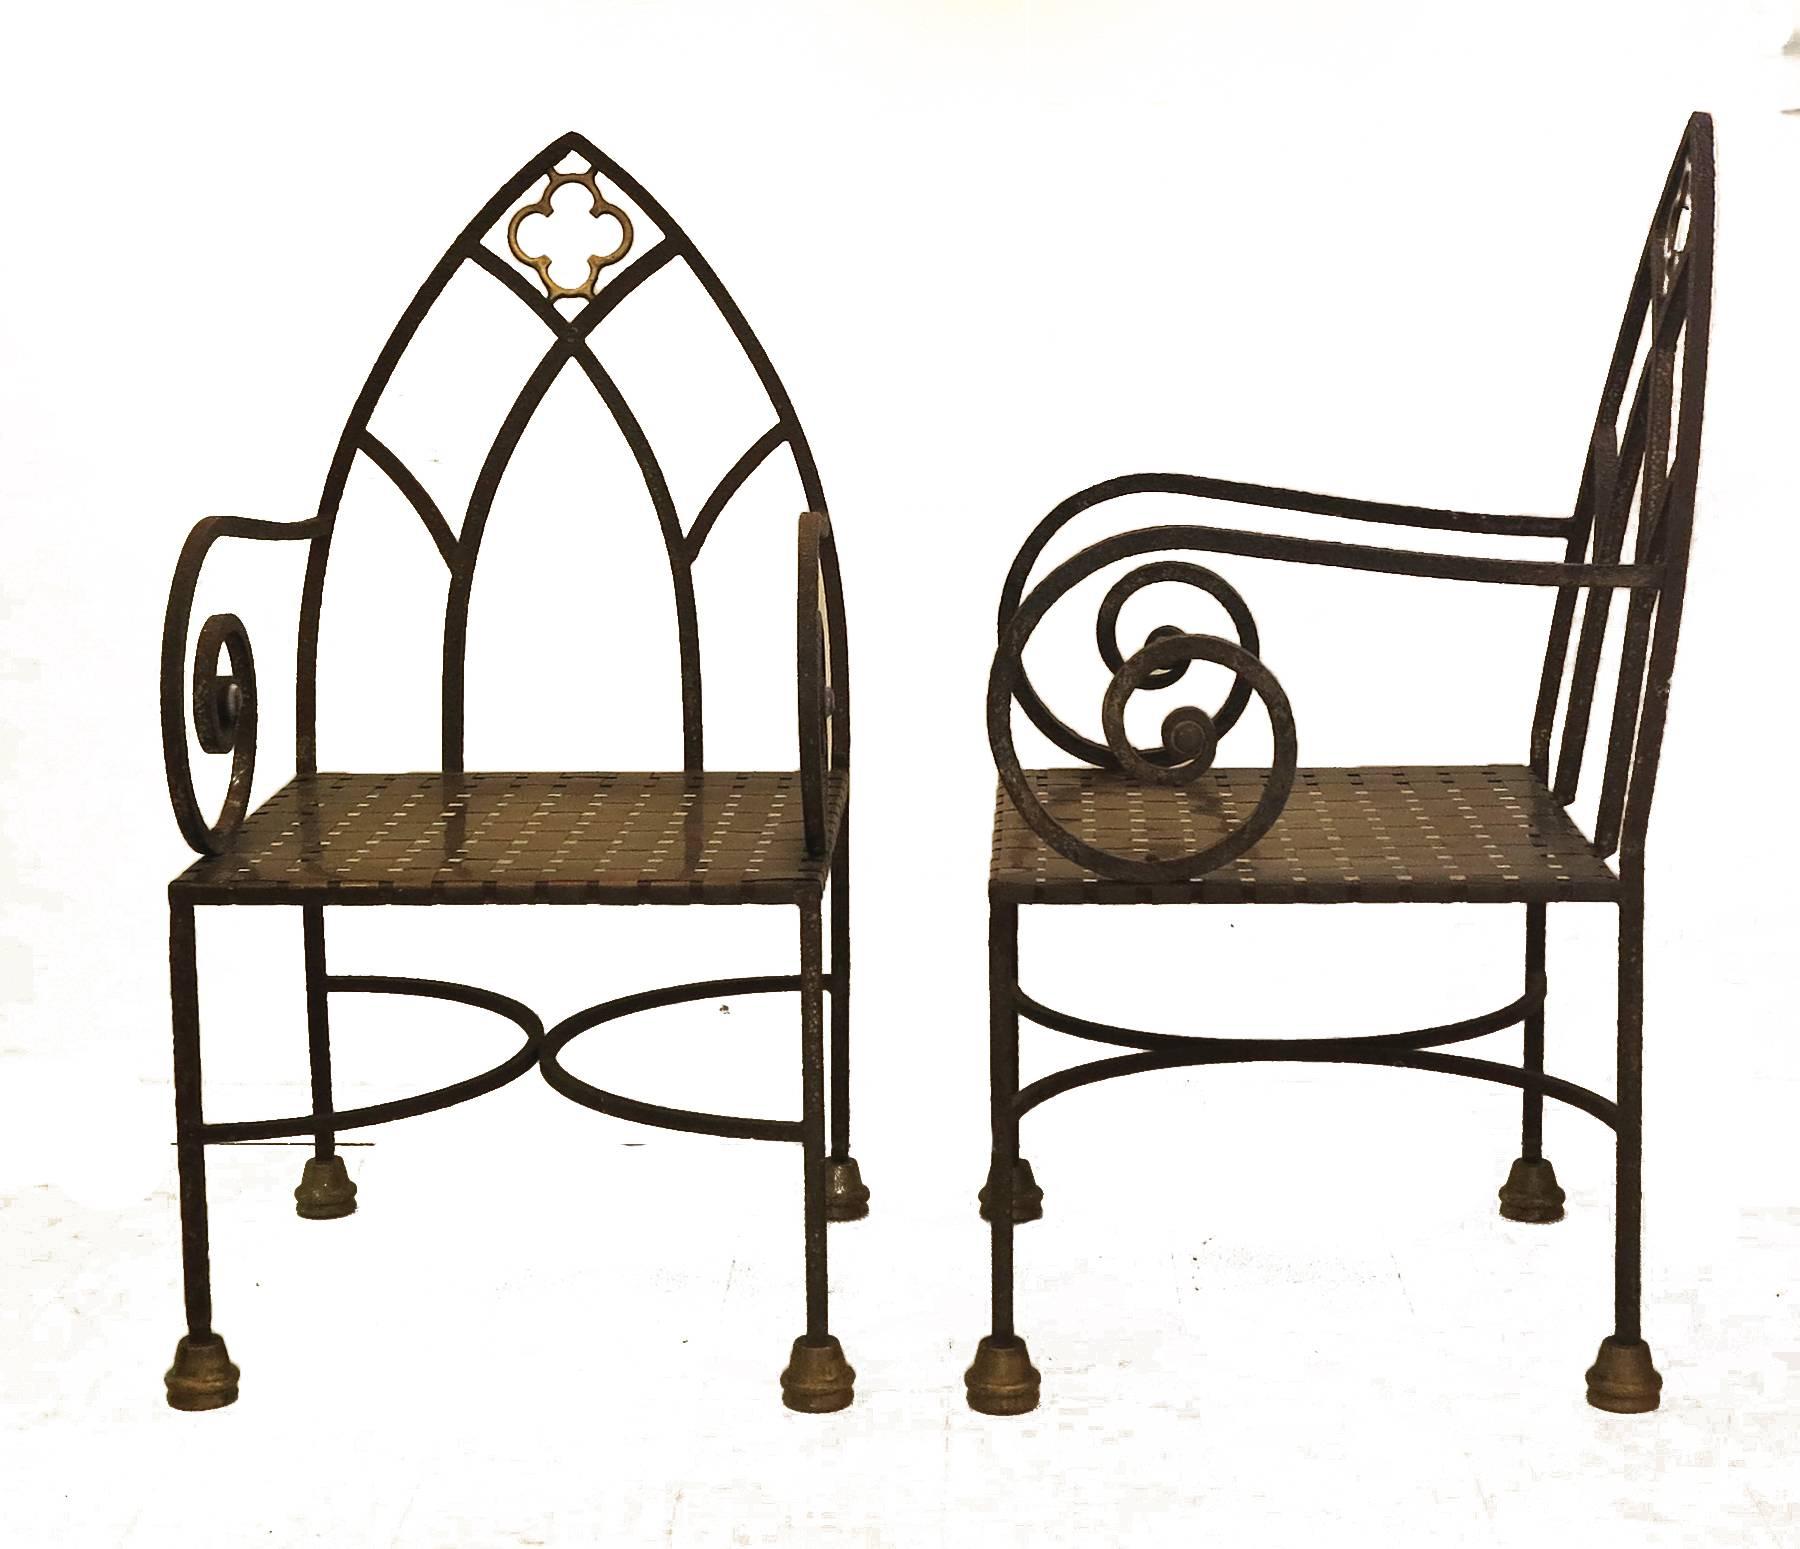 Pair of heavy iron with brass details Gothic style chairs. Woven brass seats arched back design with brass detail.